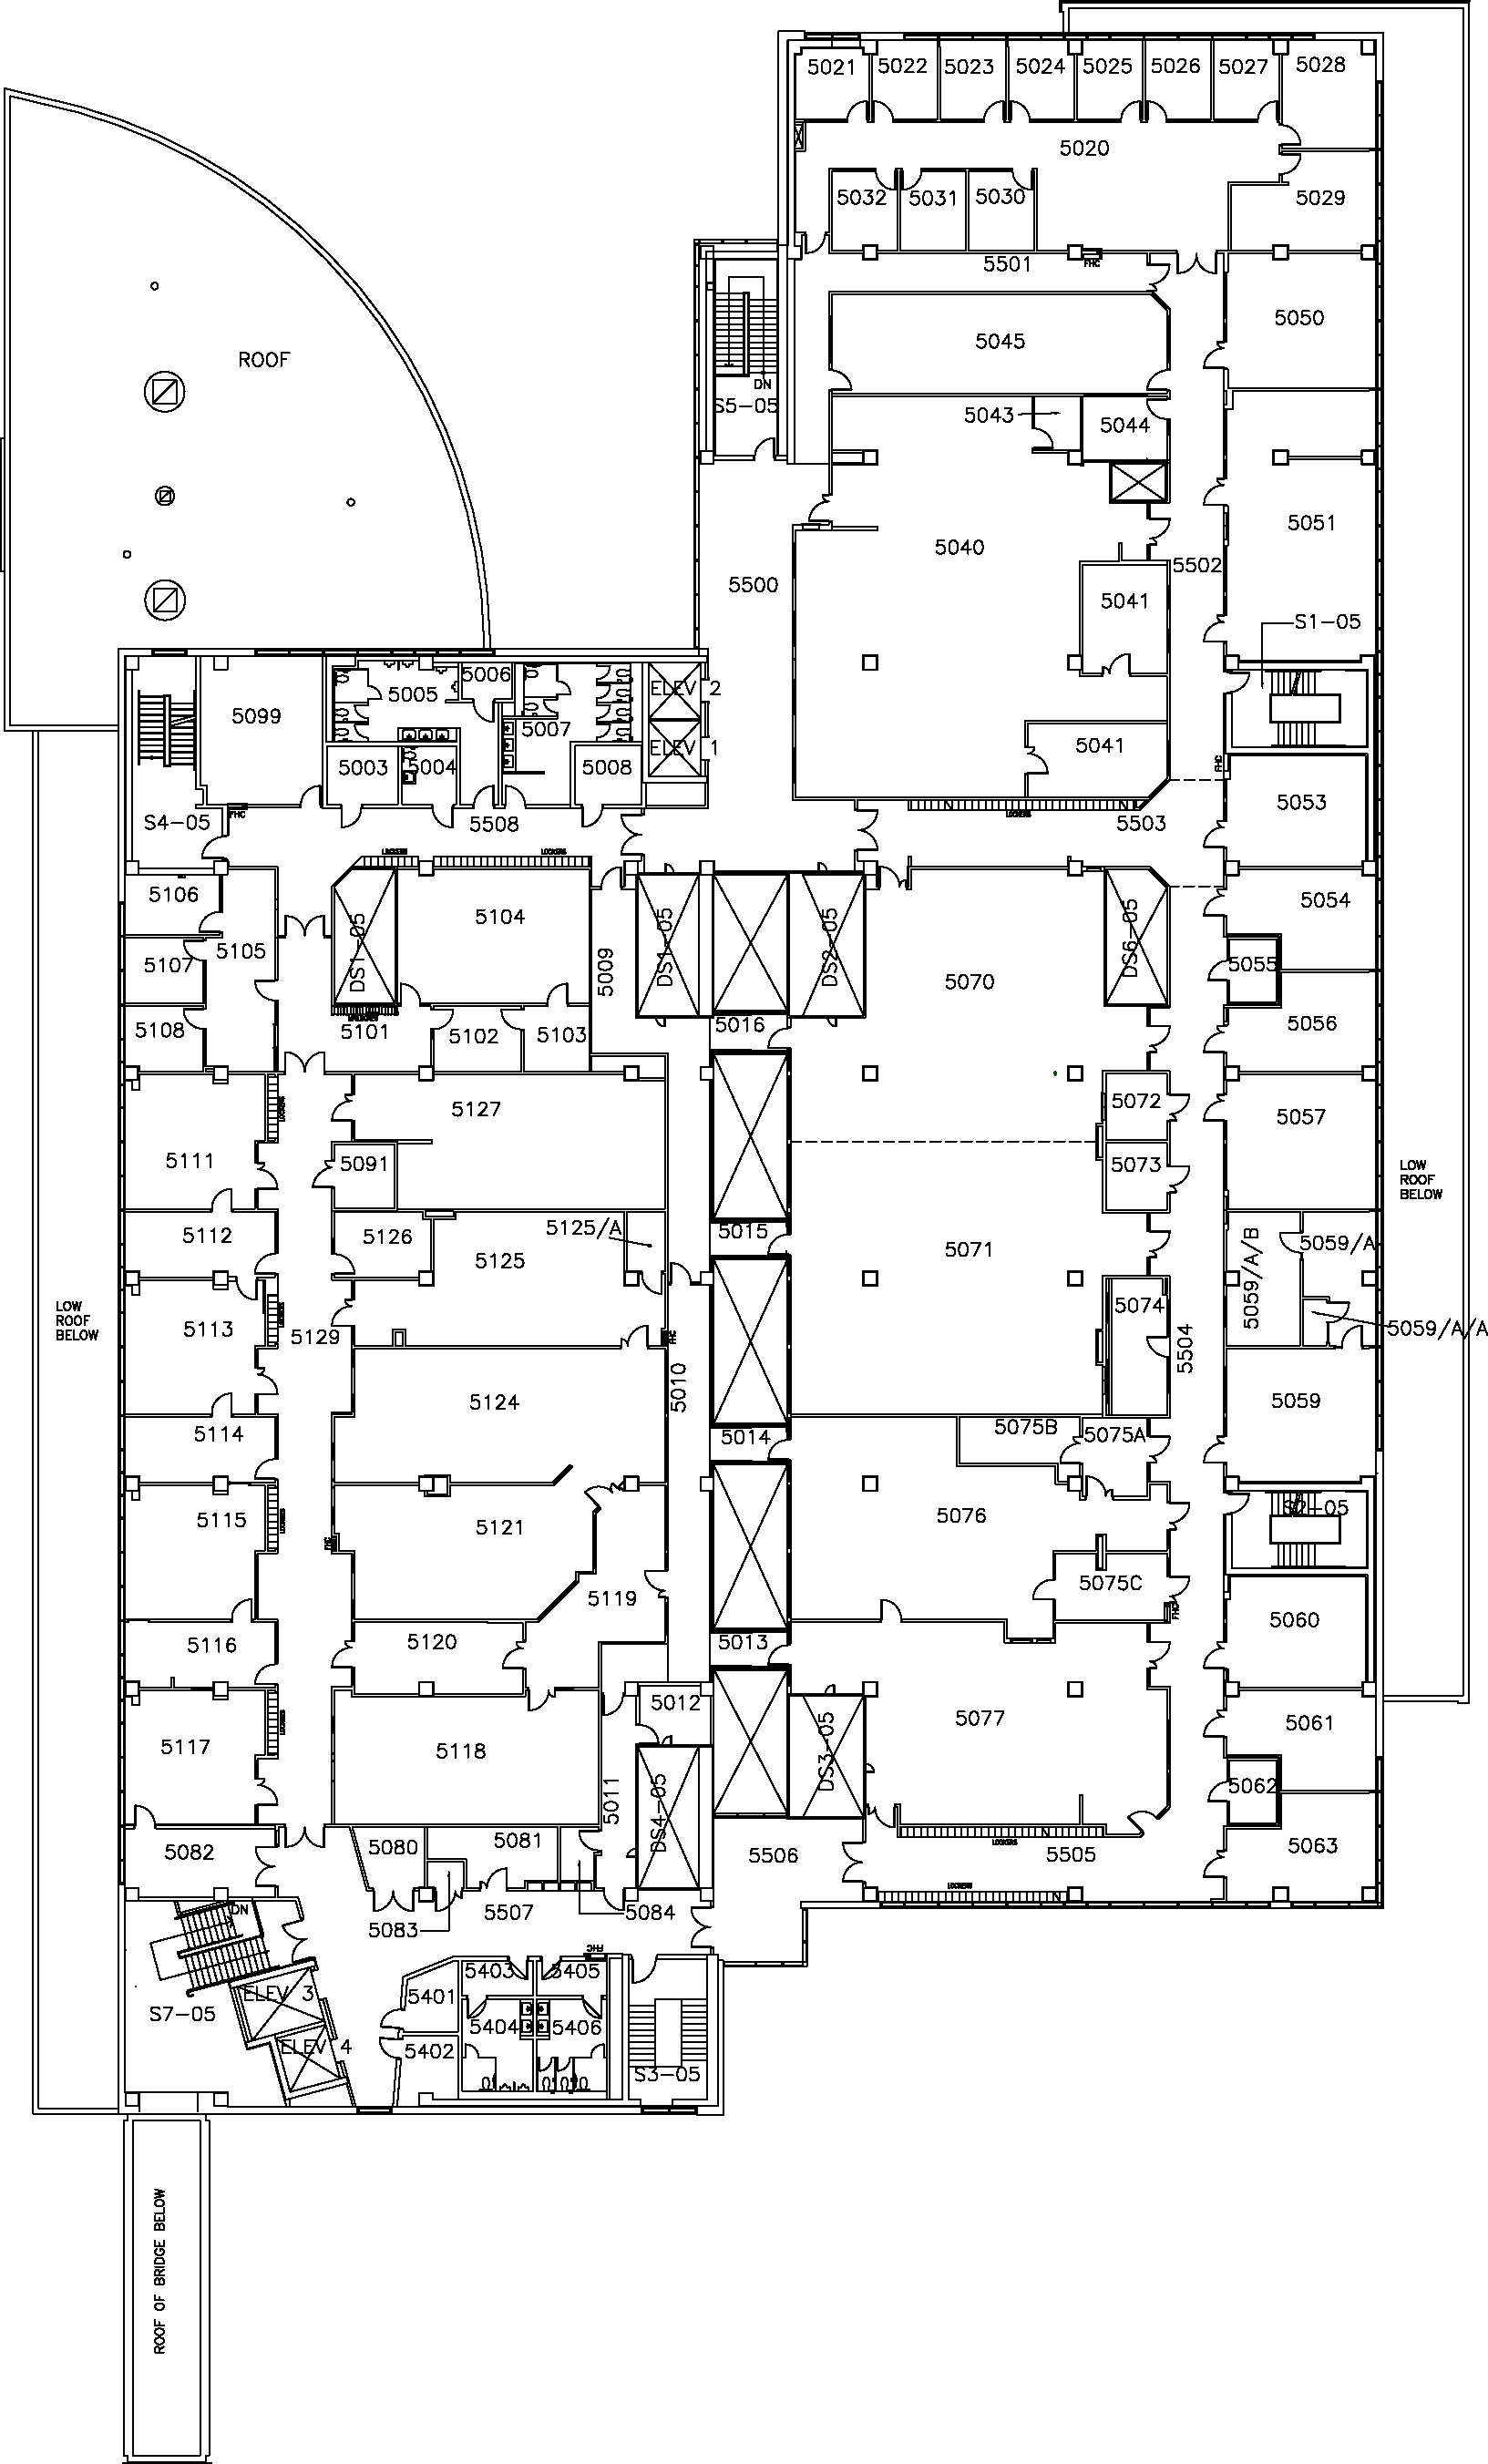 Michael DeGroote Centre for Learning and Discovery (MDCL) - Fifth Floor Map